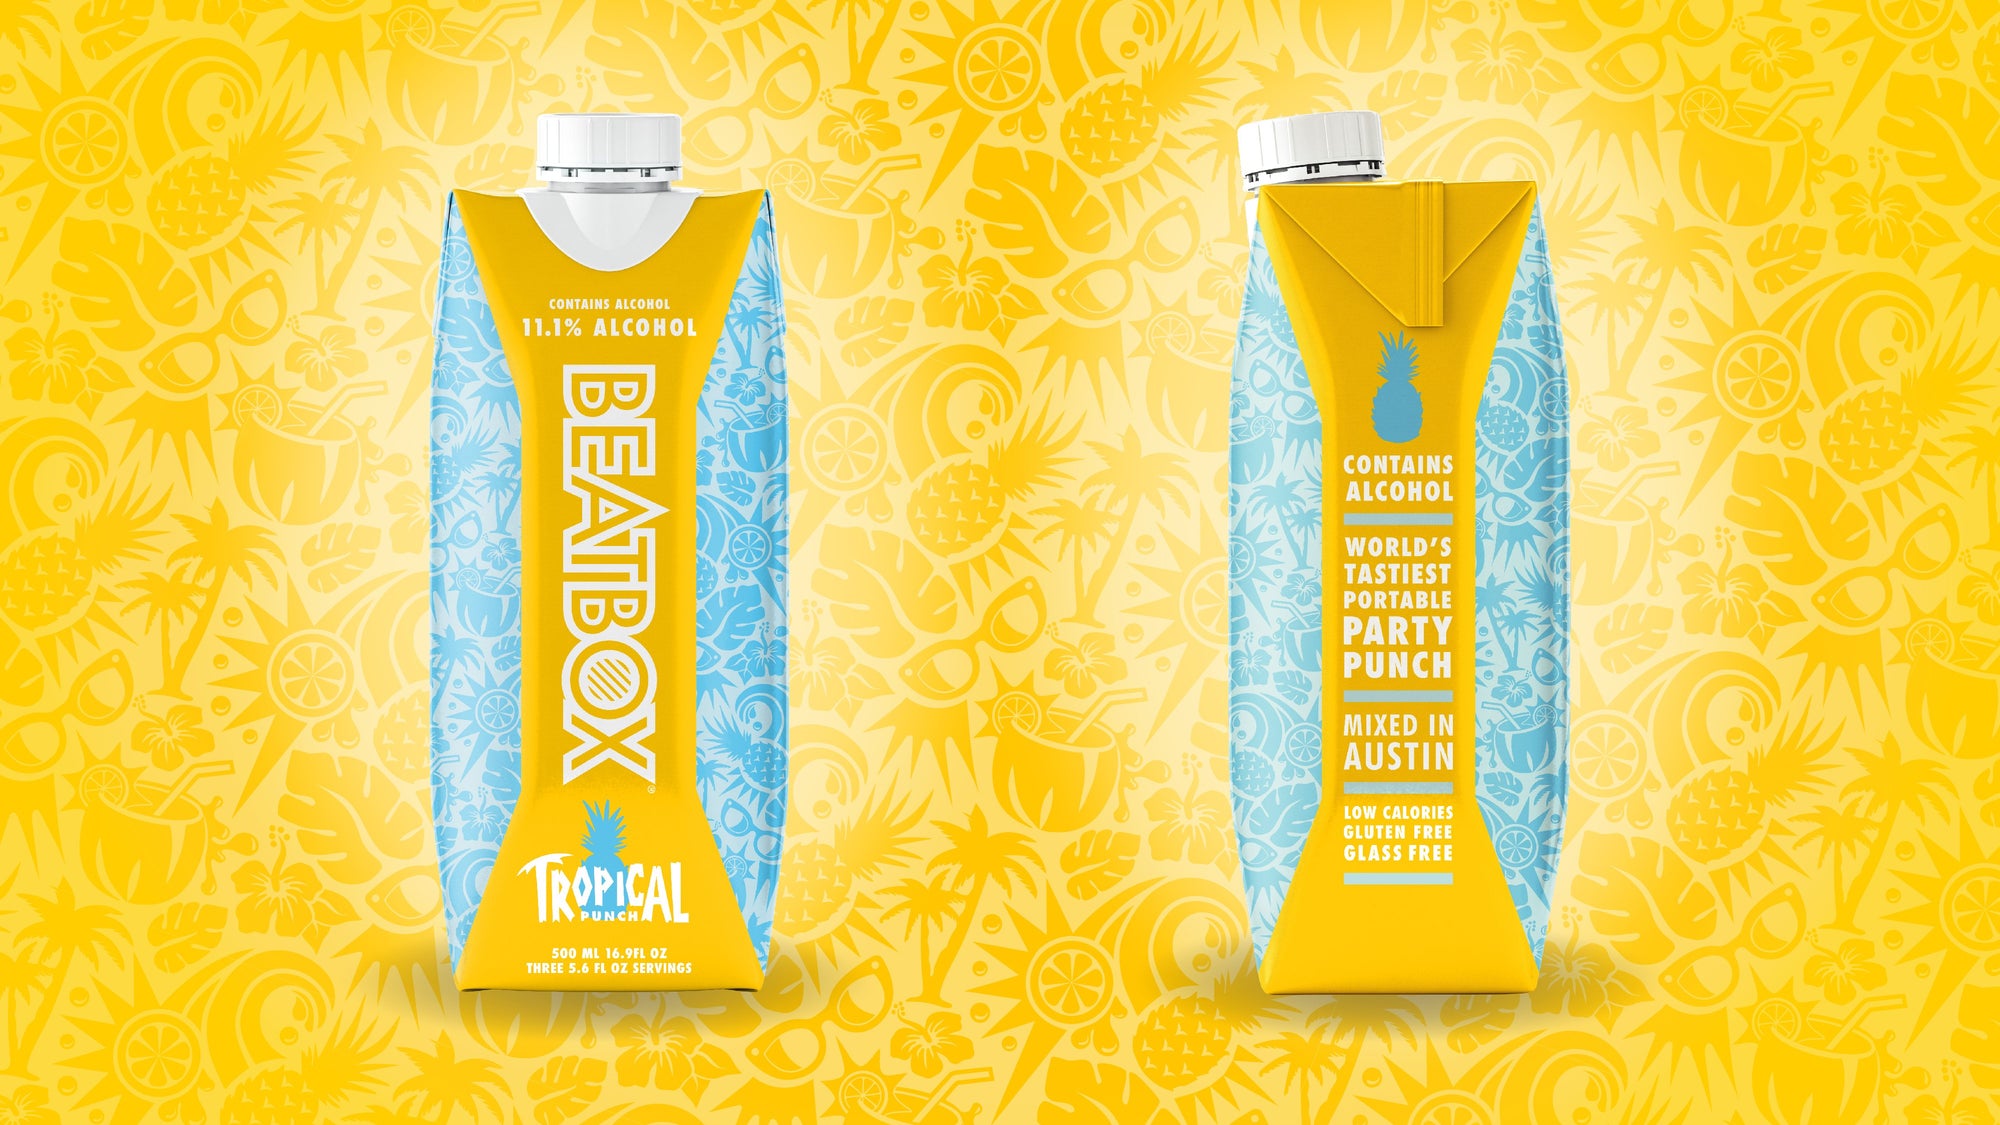 BeatBox Beverages adds Tropical Punch to its Line Up